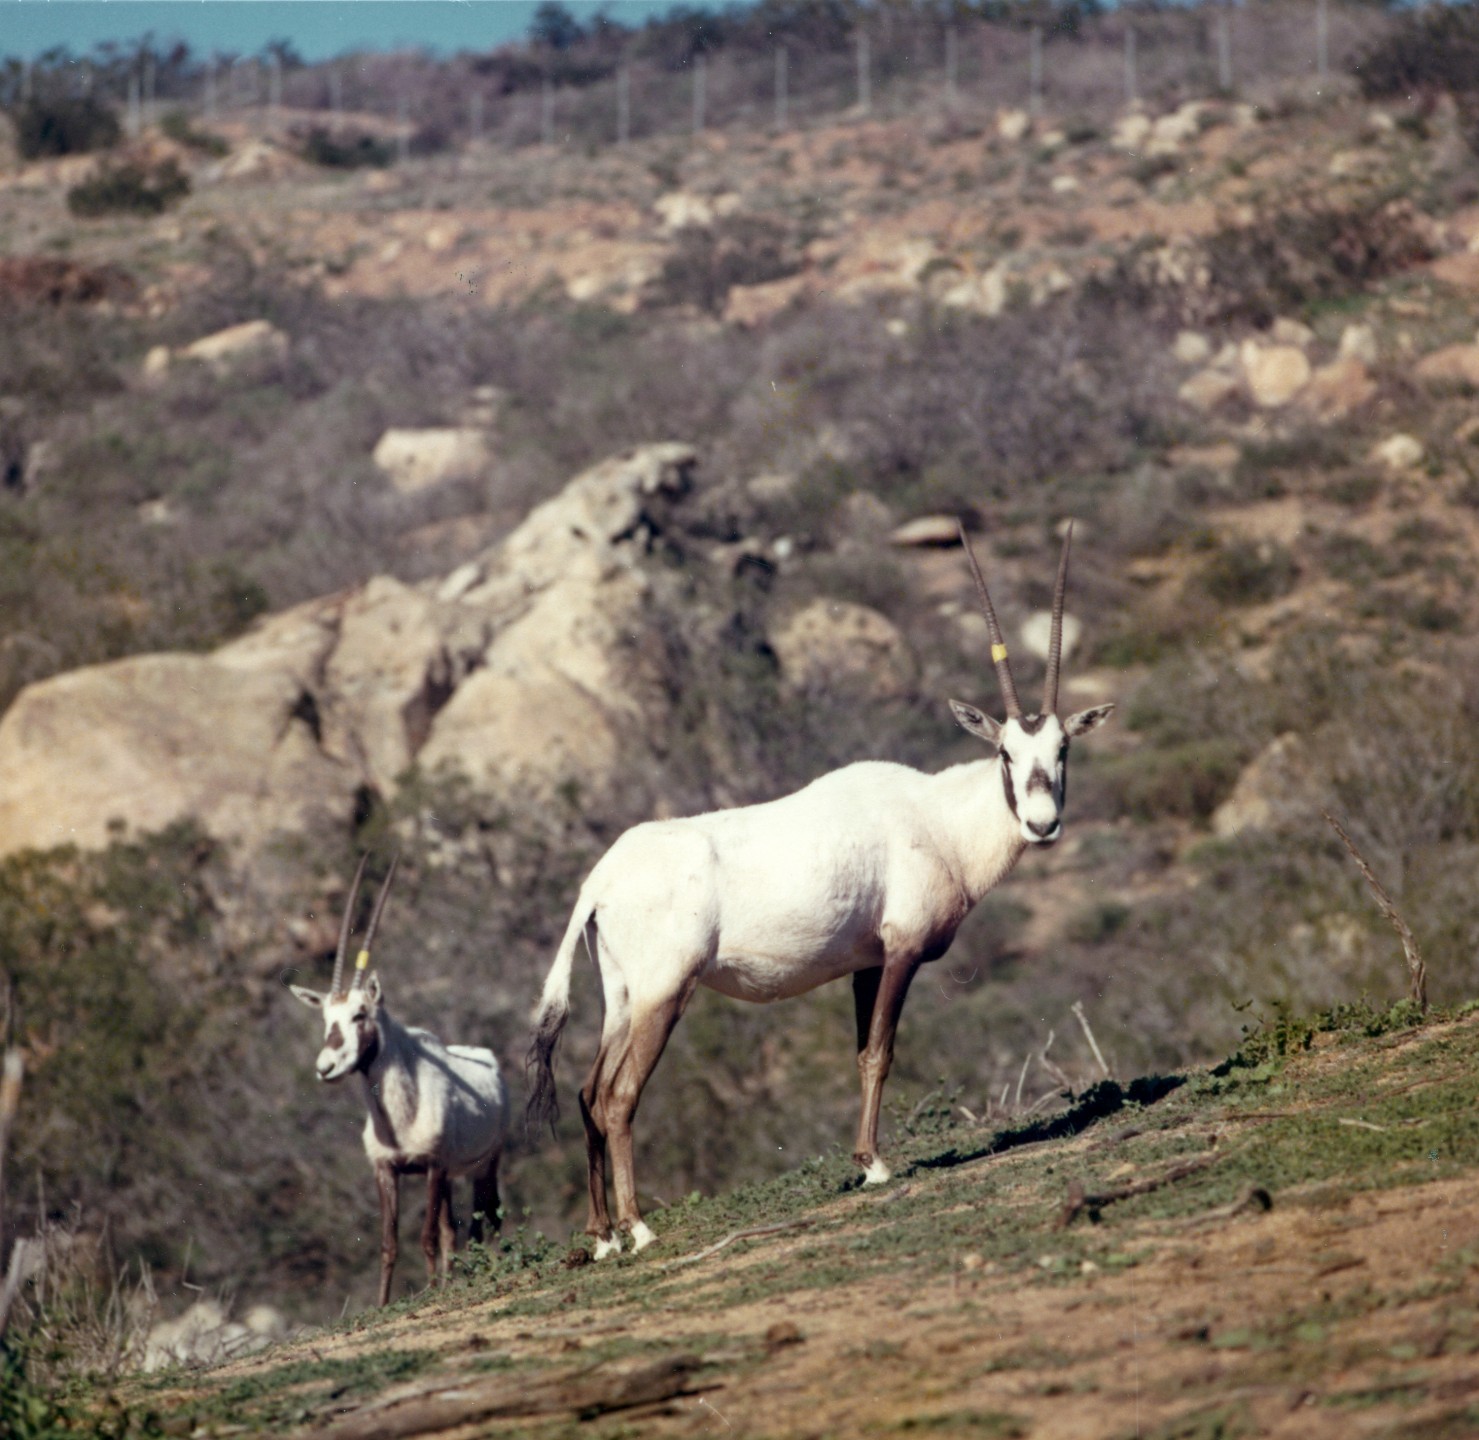 The five Arabian oryx that came to the Wild Animal Park in 1972 were females Betty and Annie, seen here, and males Frank, Maurice, and Bob. The tape on the horns was used to identify them, with different colors or placed on different horns.